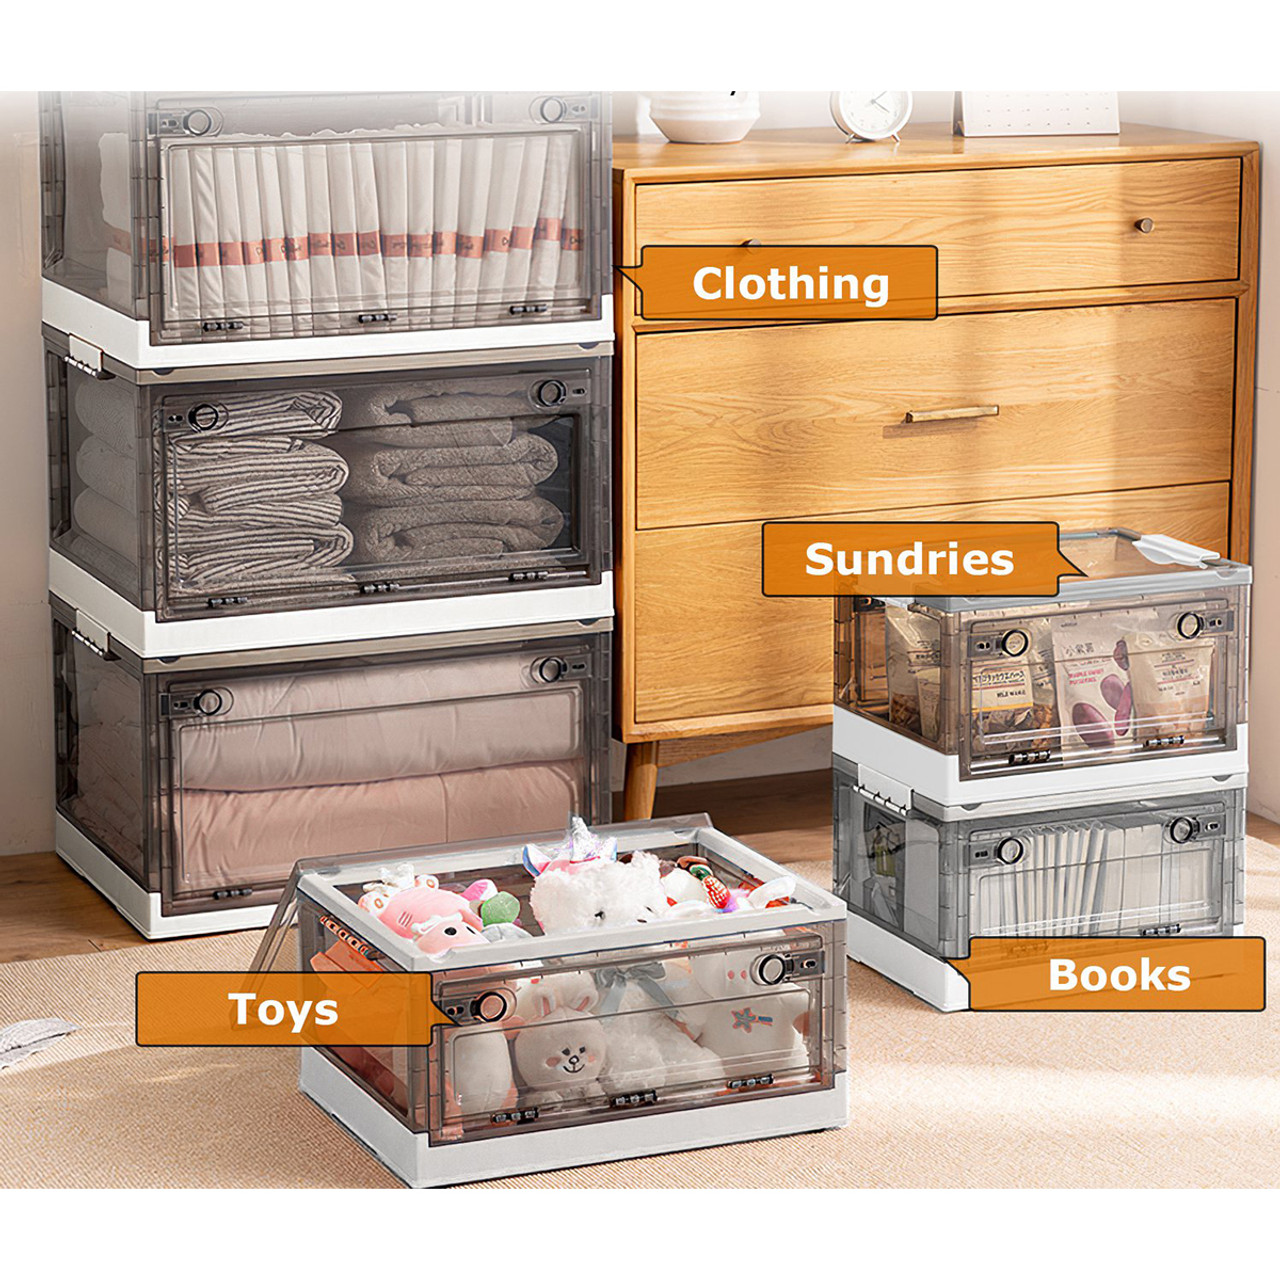 NewHome™ Foldable Storage Bins (2-Pack) product image